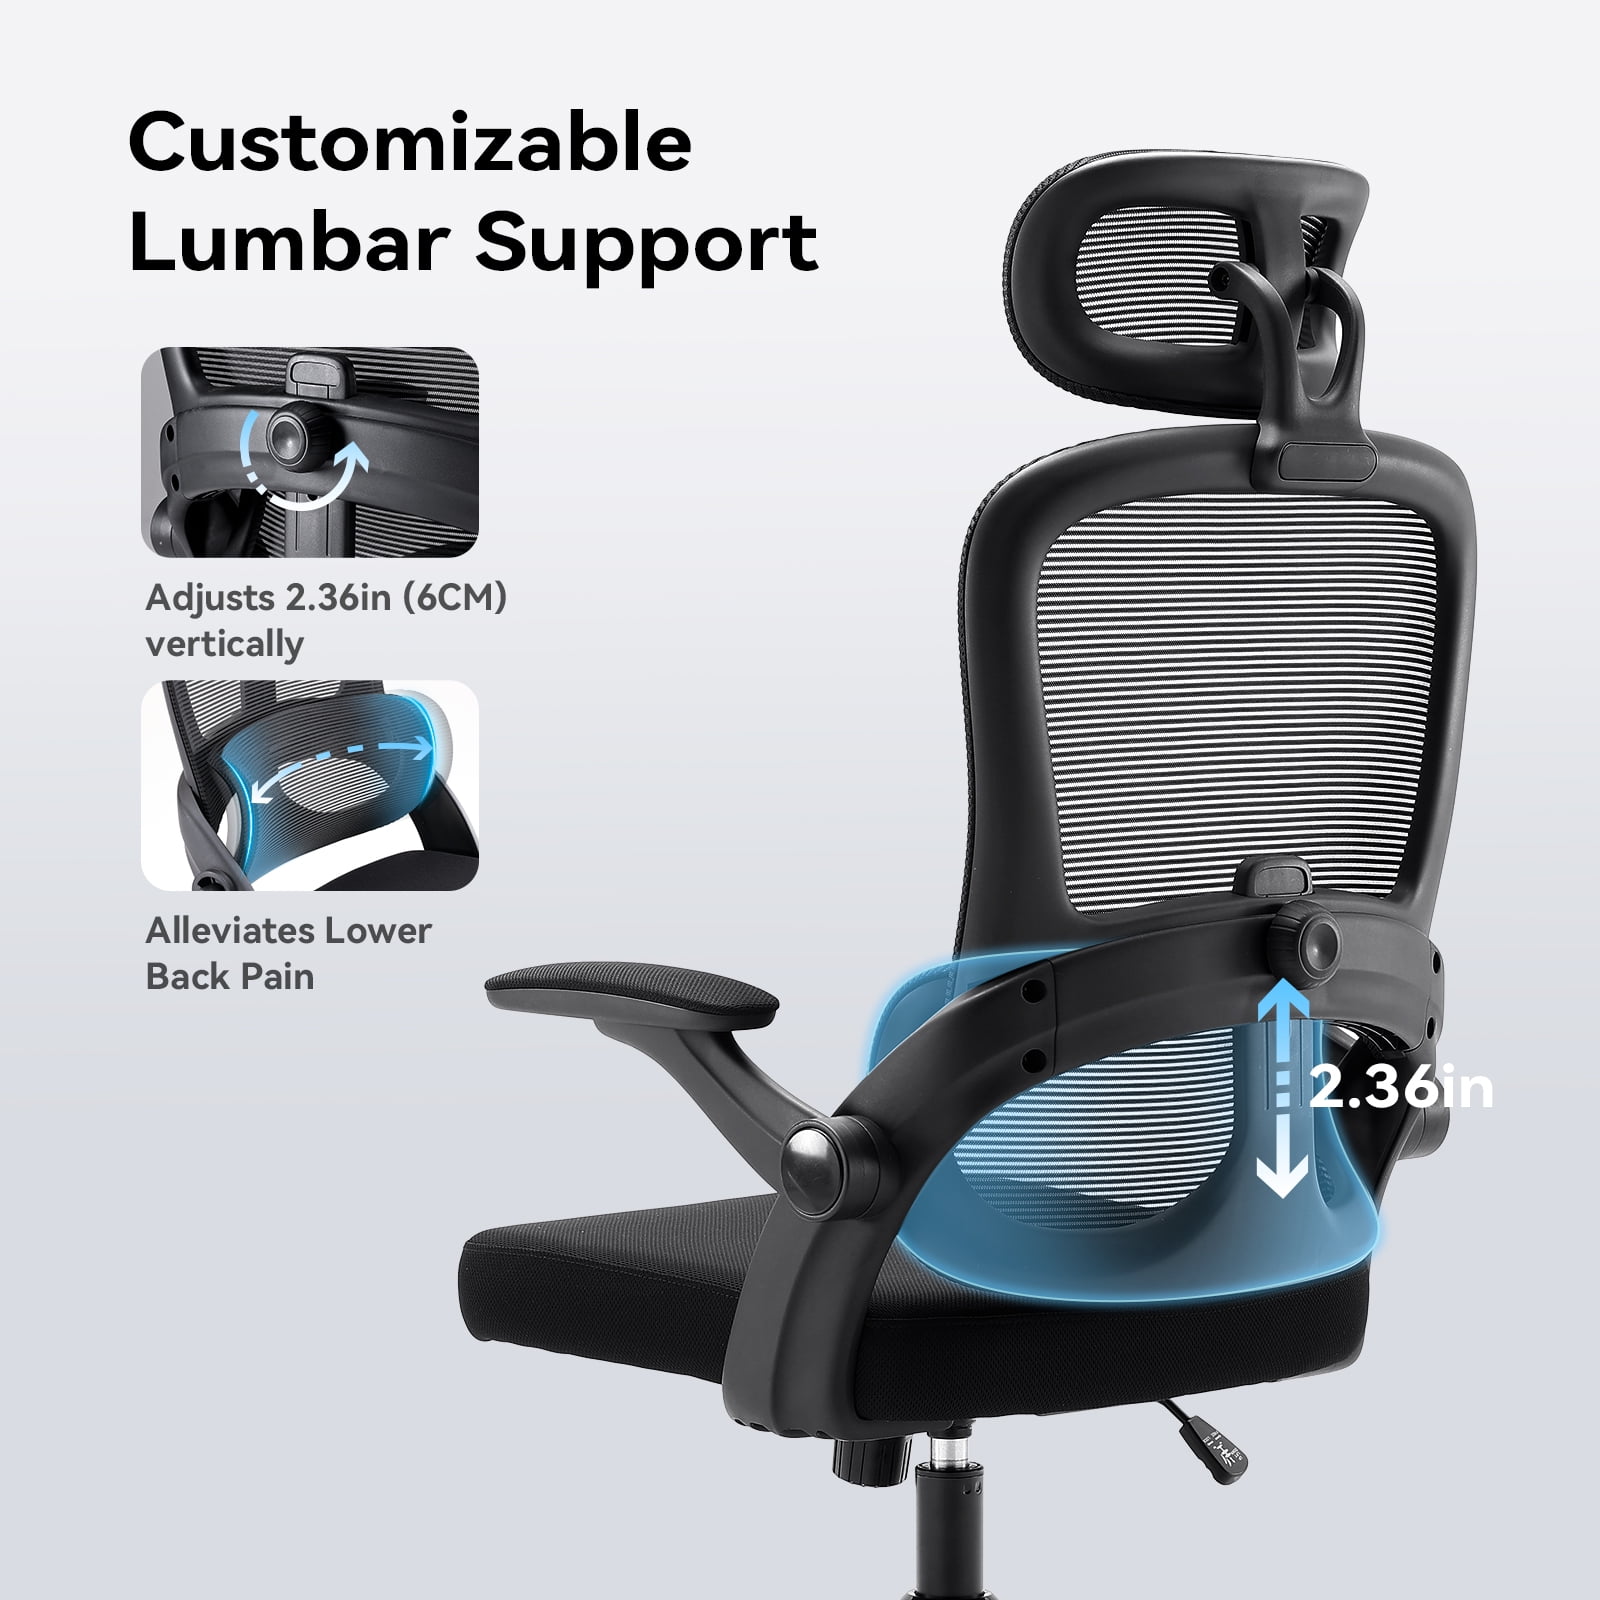 Sihoo Ergonomic Office Chair with Flip-up Armrests for Small Spaces, Mesh  Conference Chair